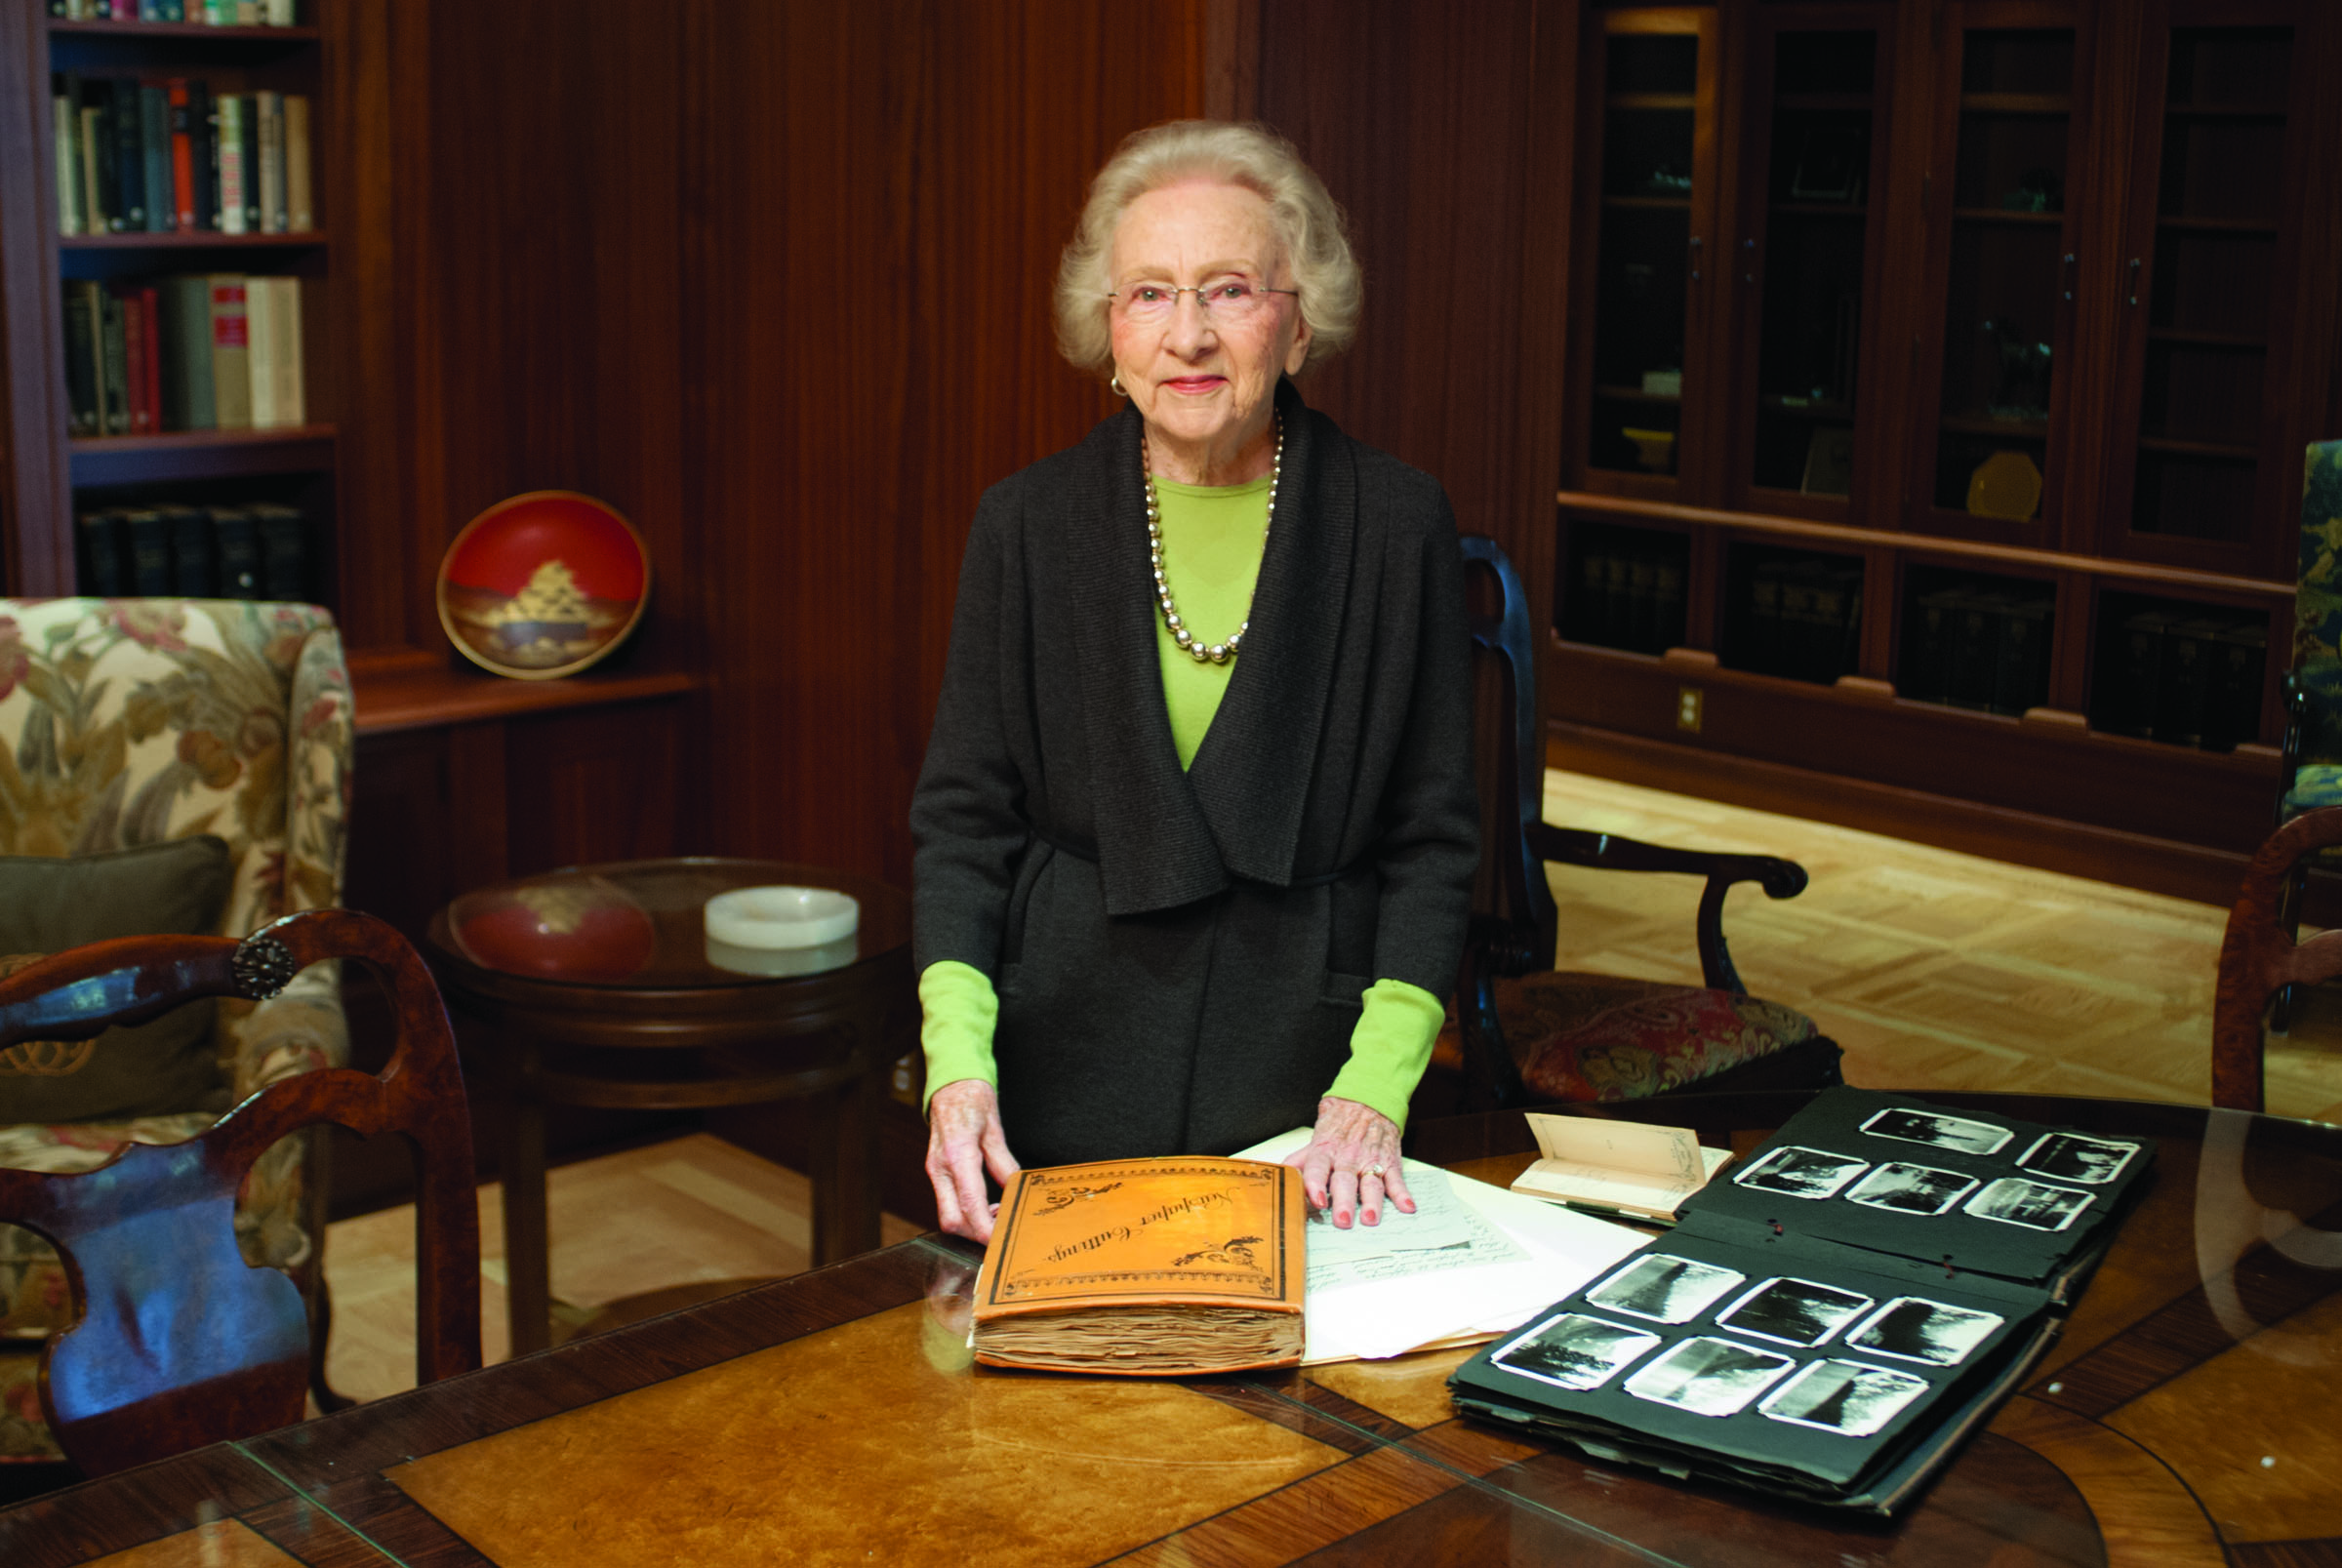 Aileen H. Clyde founded the Aileen H. Clyde 20th Century Women’s Legacy Archive with the J. Willard Marriott Library at The University of Utah in order to capture and preserve the stories of remarkable women. In this photo Aileen views some collections from the archive at the J. Willard Marriott Library.